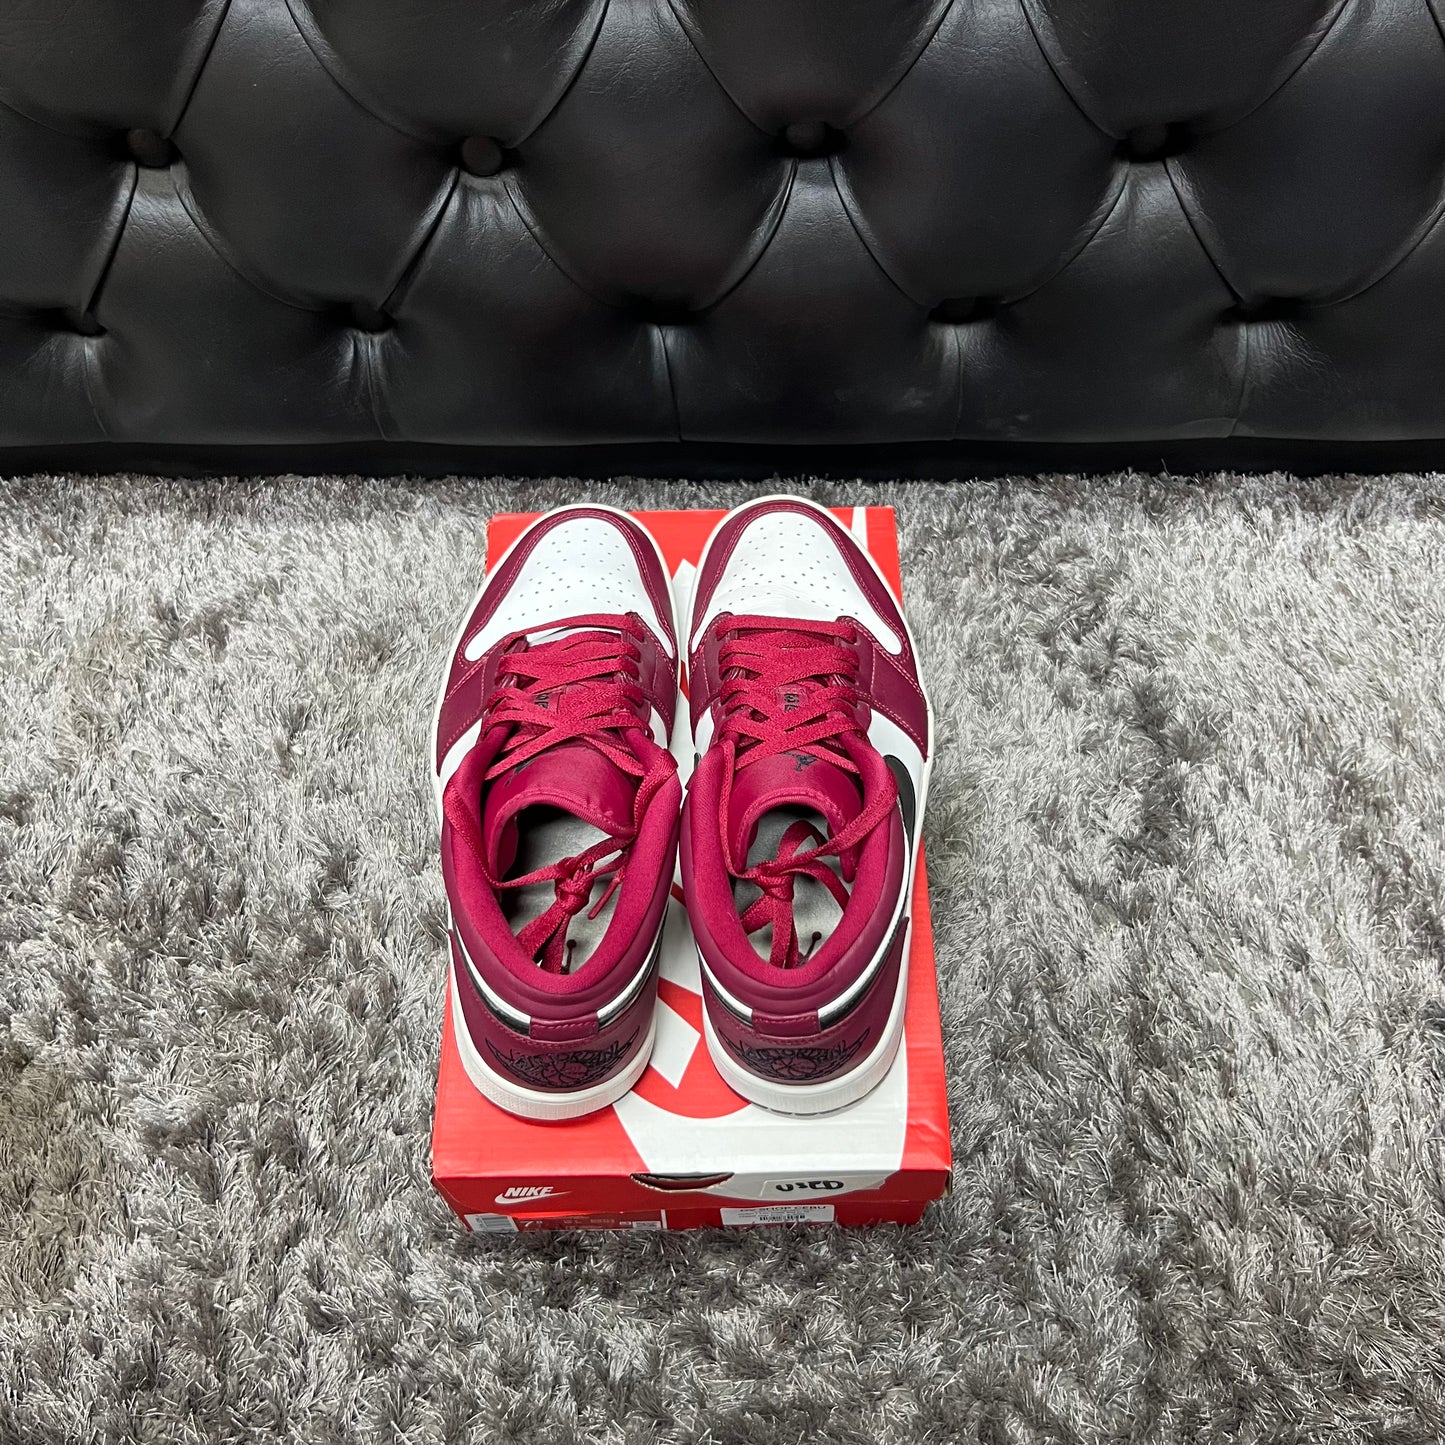 Jordan 1 Low Noble Red size 10 used